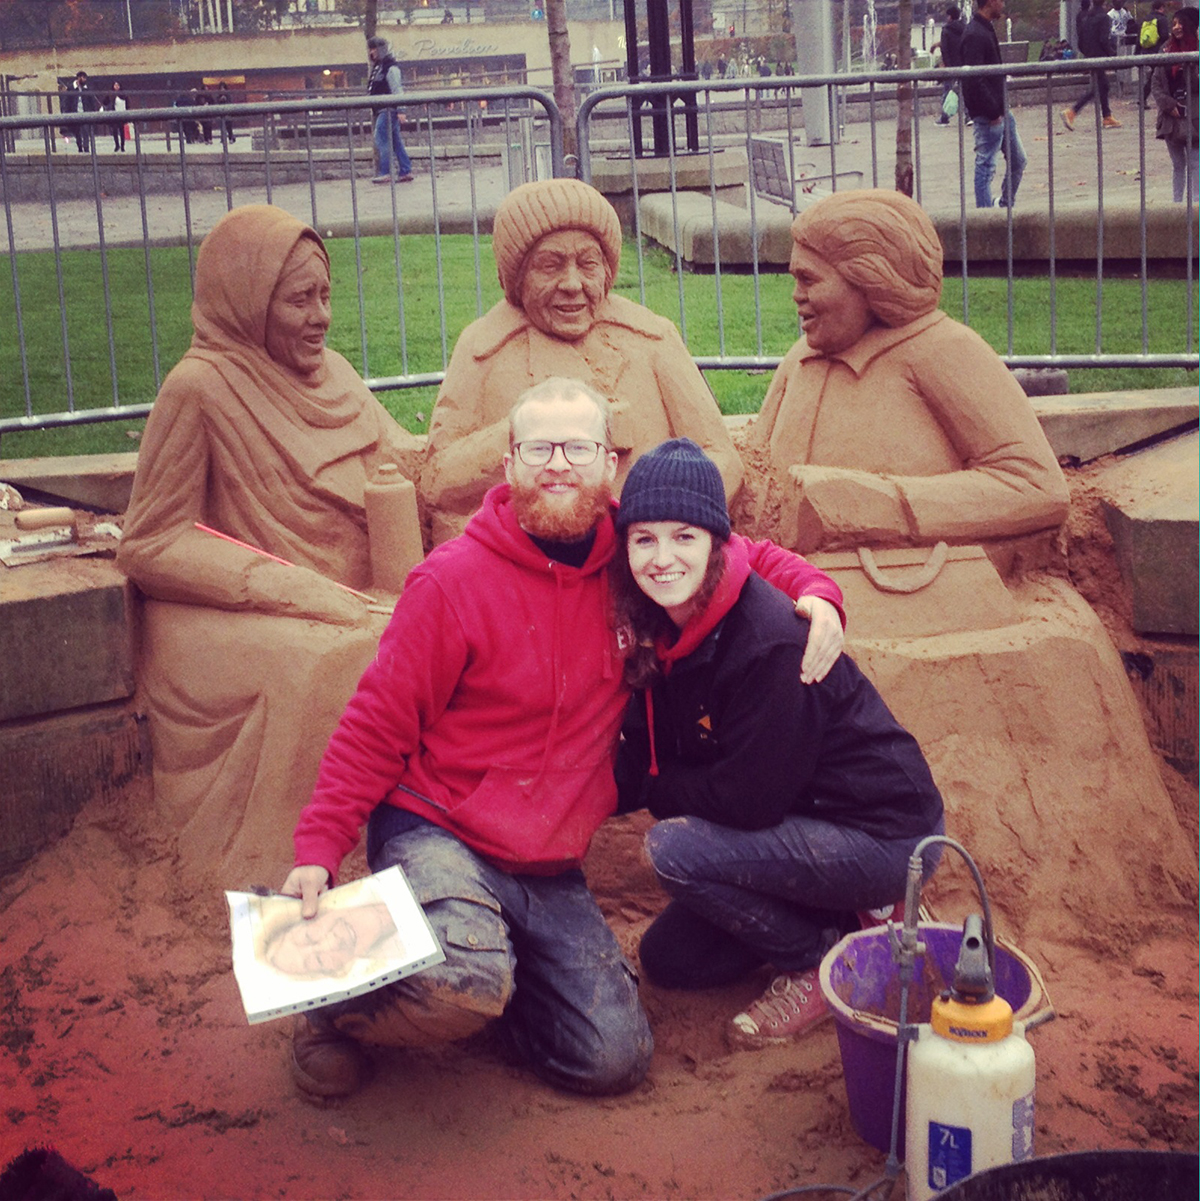 Jamie Wardley and Claire Jamieson, sand sculptors working on the Bradford sand sculpture event